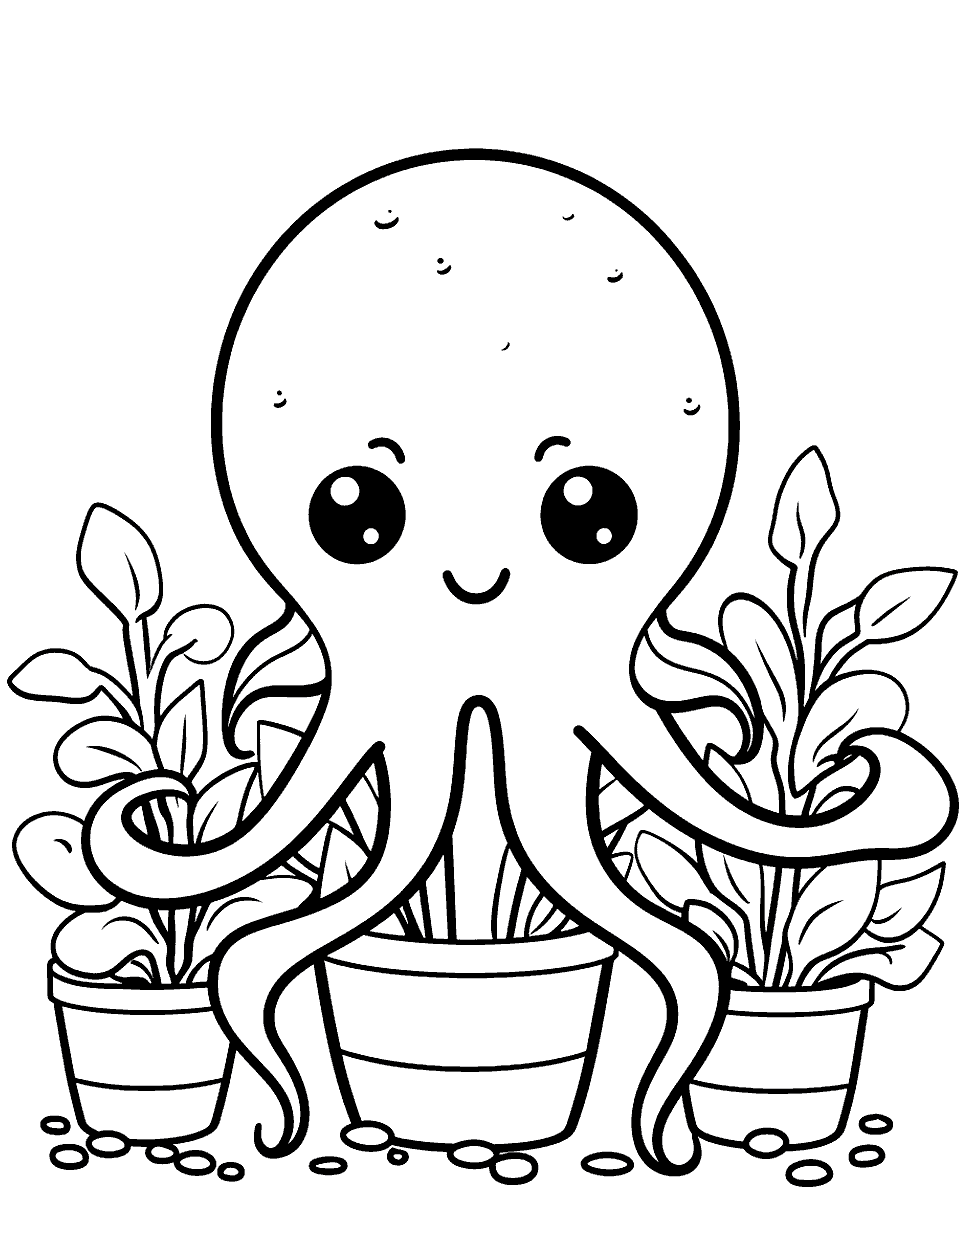 Gardening Octopus with Plants Coloring Page - An octopus happily gardening, surrounded by potted plants.